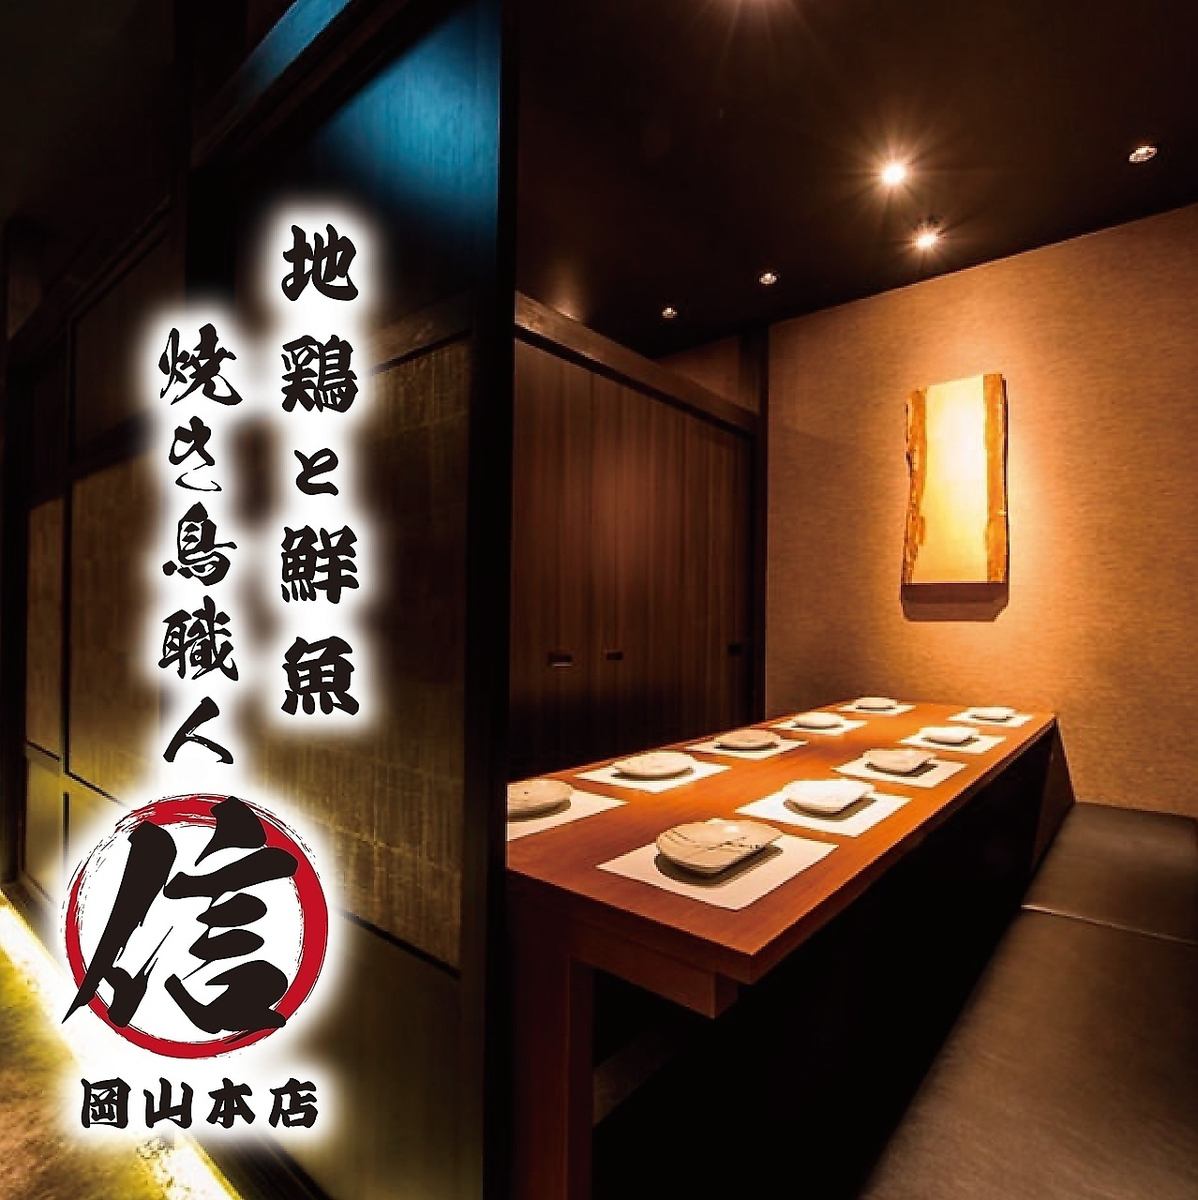 ★ NEW OPEN at Okayama Station ☆ Enjoy a completely private room and Japanese local cuisine prepared by a yakitori craftsman ♪